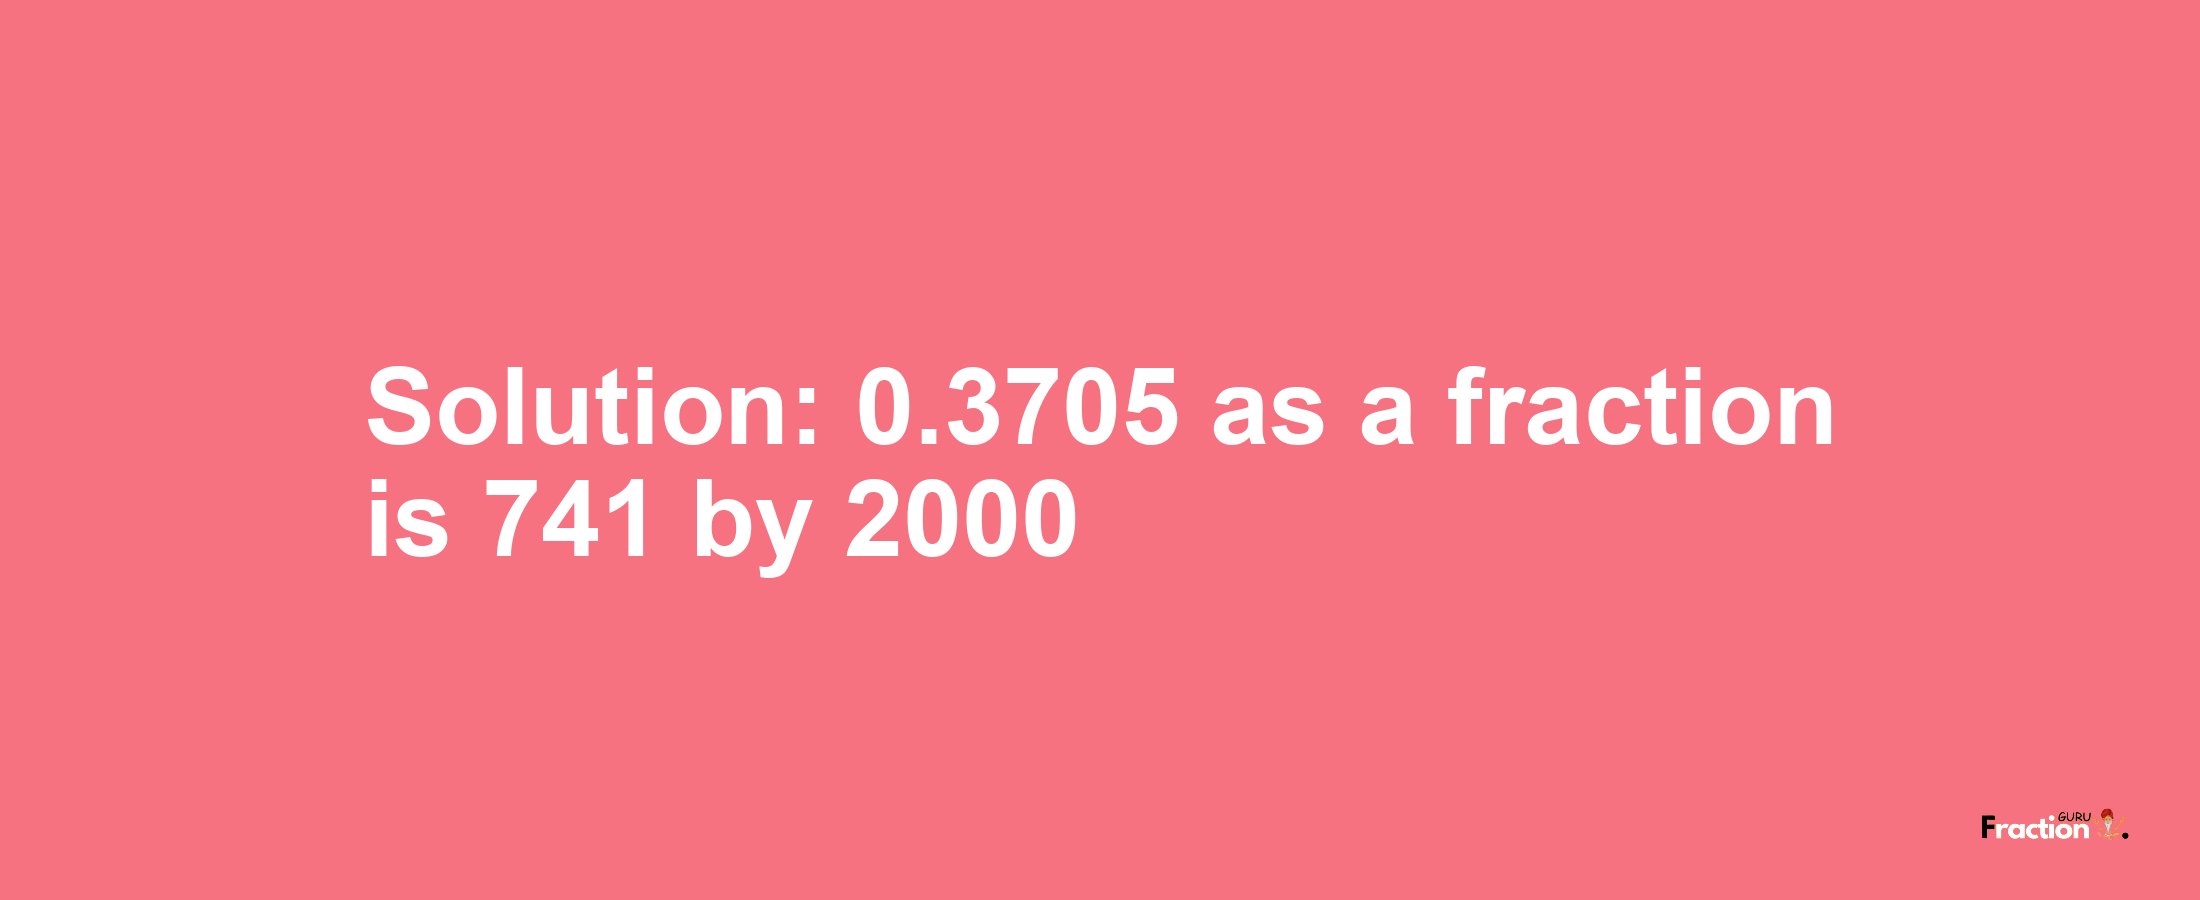 Solution:0.3705 as a fraction is 741/2000